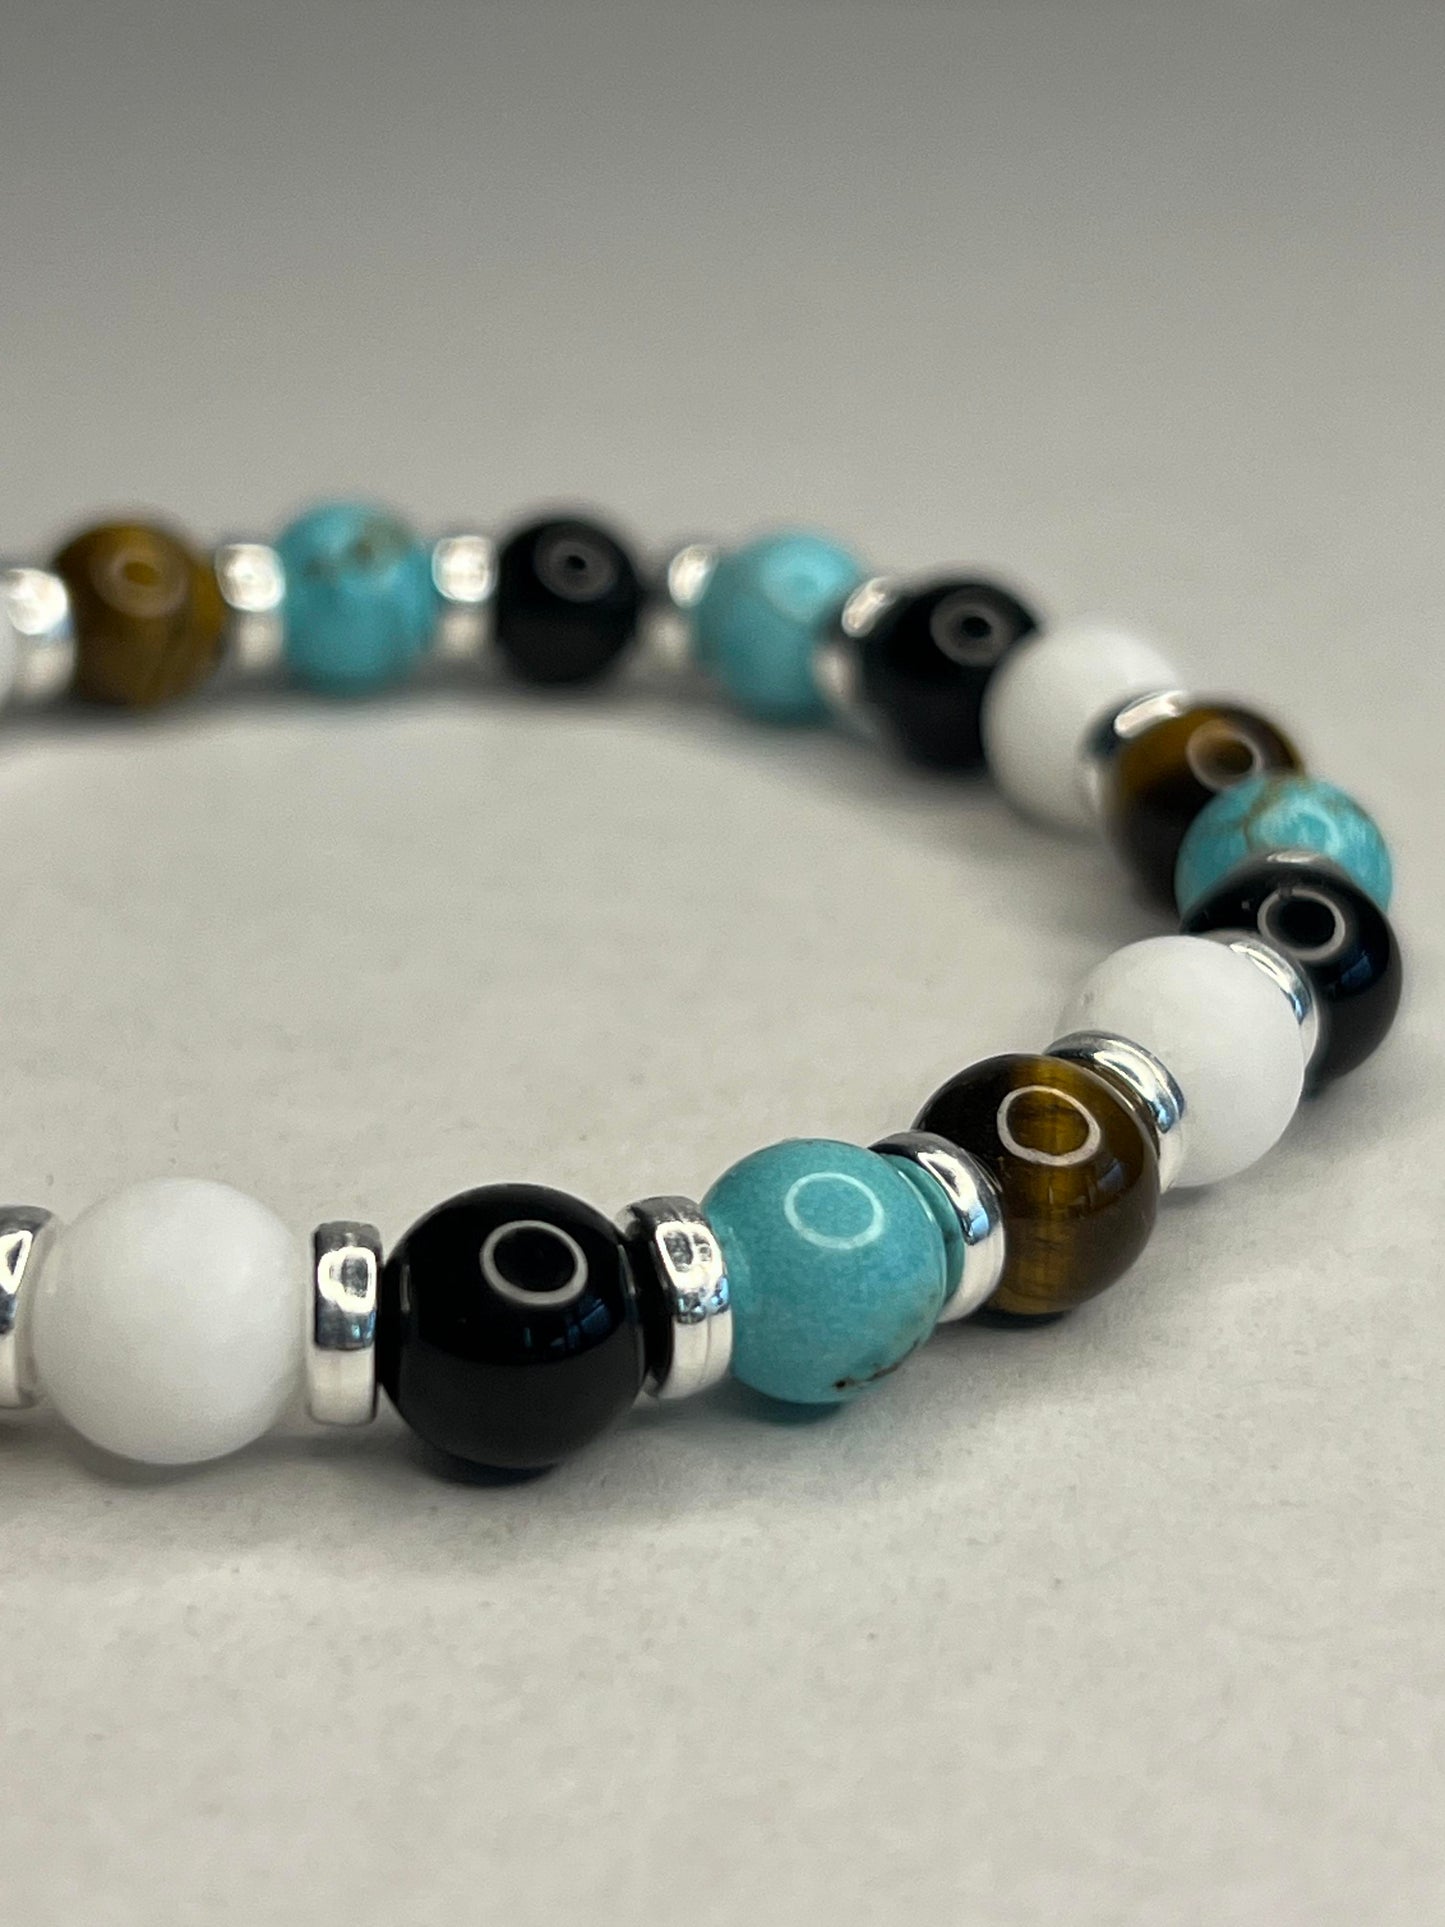 Turquoise and Yellow Tiger Eye with Onyx, Pure White Quartz and steel